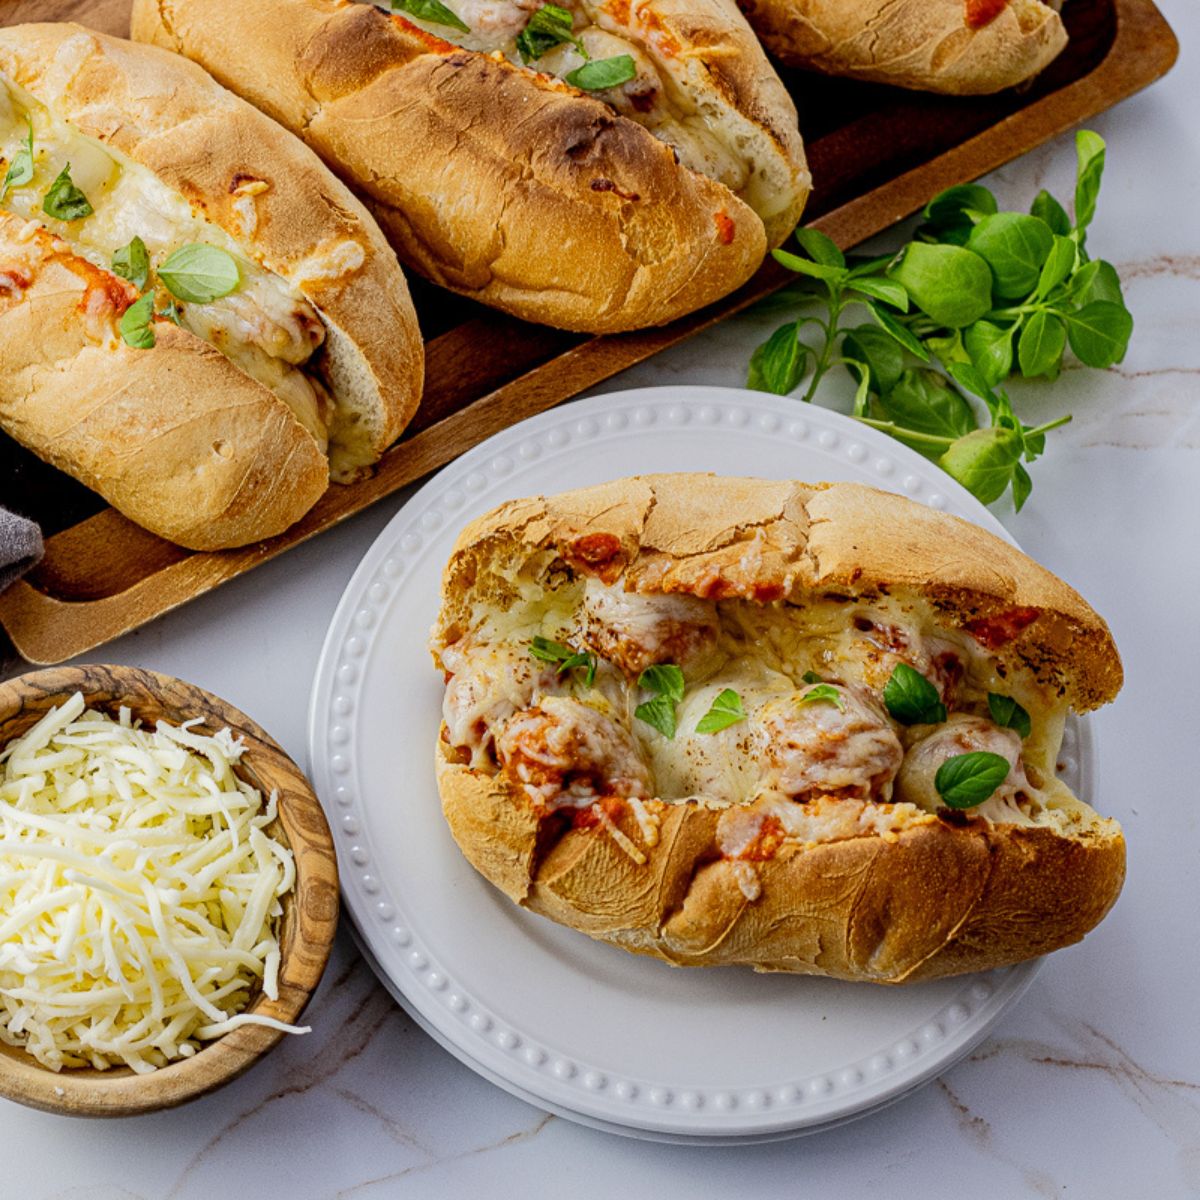 Slow Cooker Meatball Sandwiches